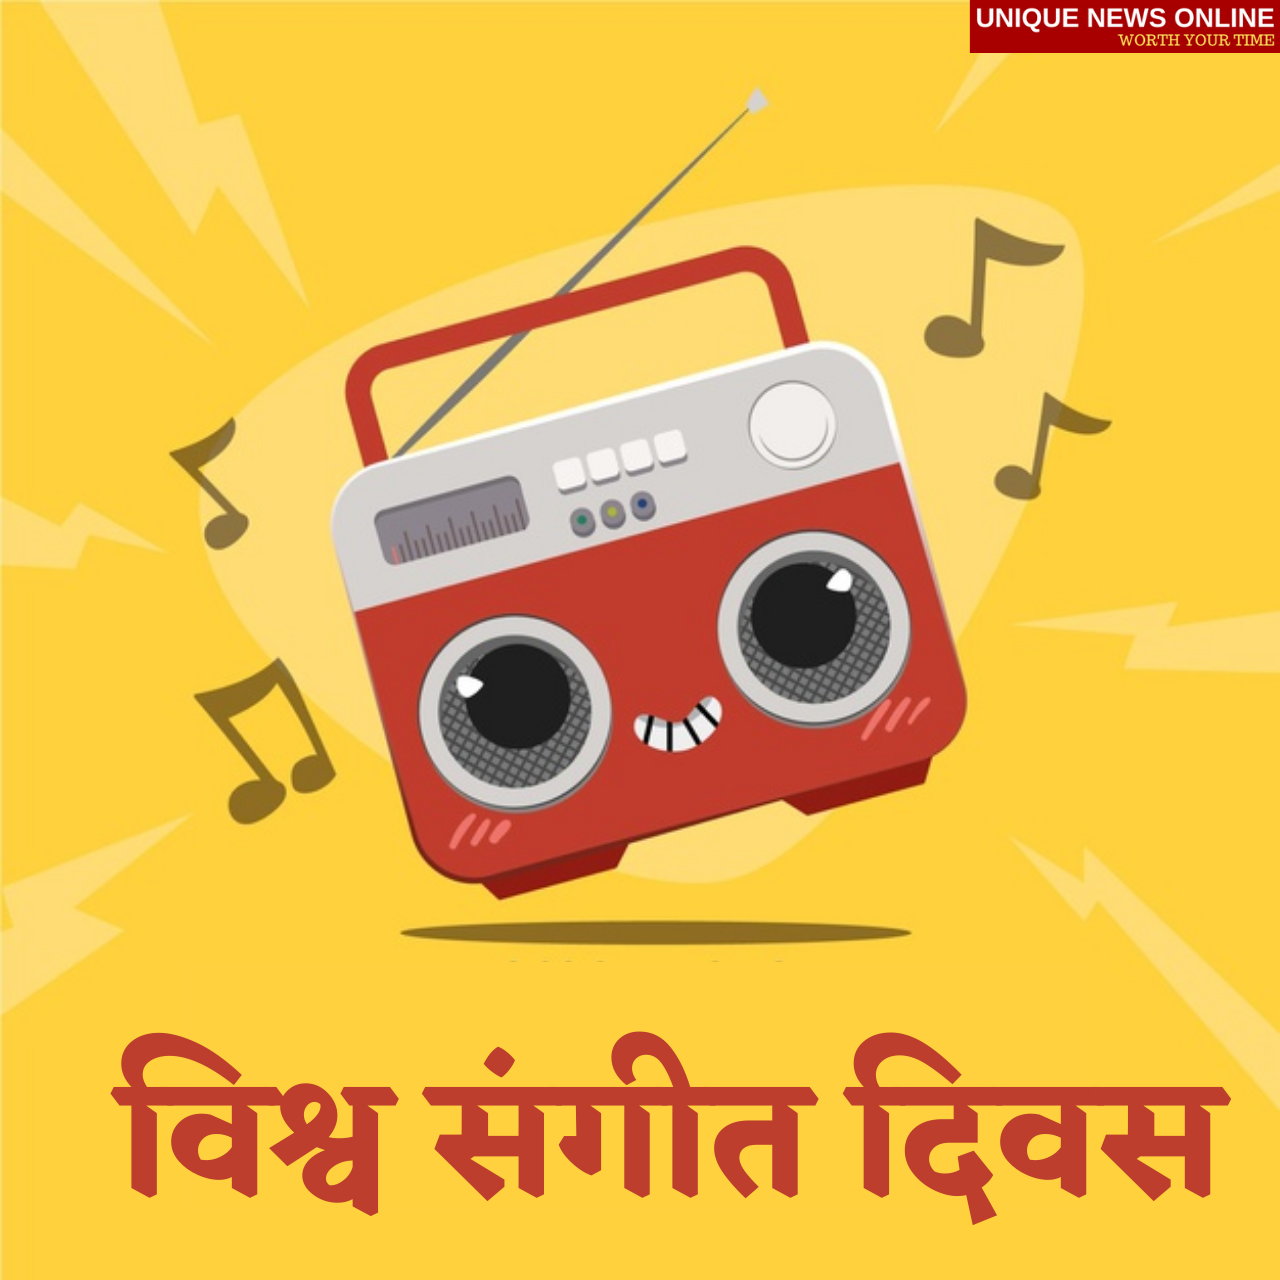 World Music Day 2021 Hindi Quotes, Images, Wishes, Poster, Status, Messages, and Greetings to celebrate this day with your Loved Ones